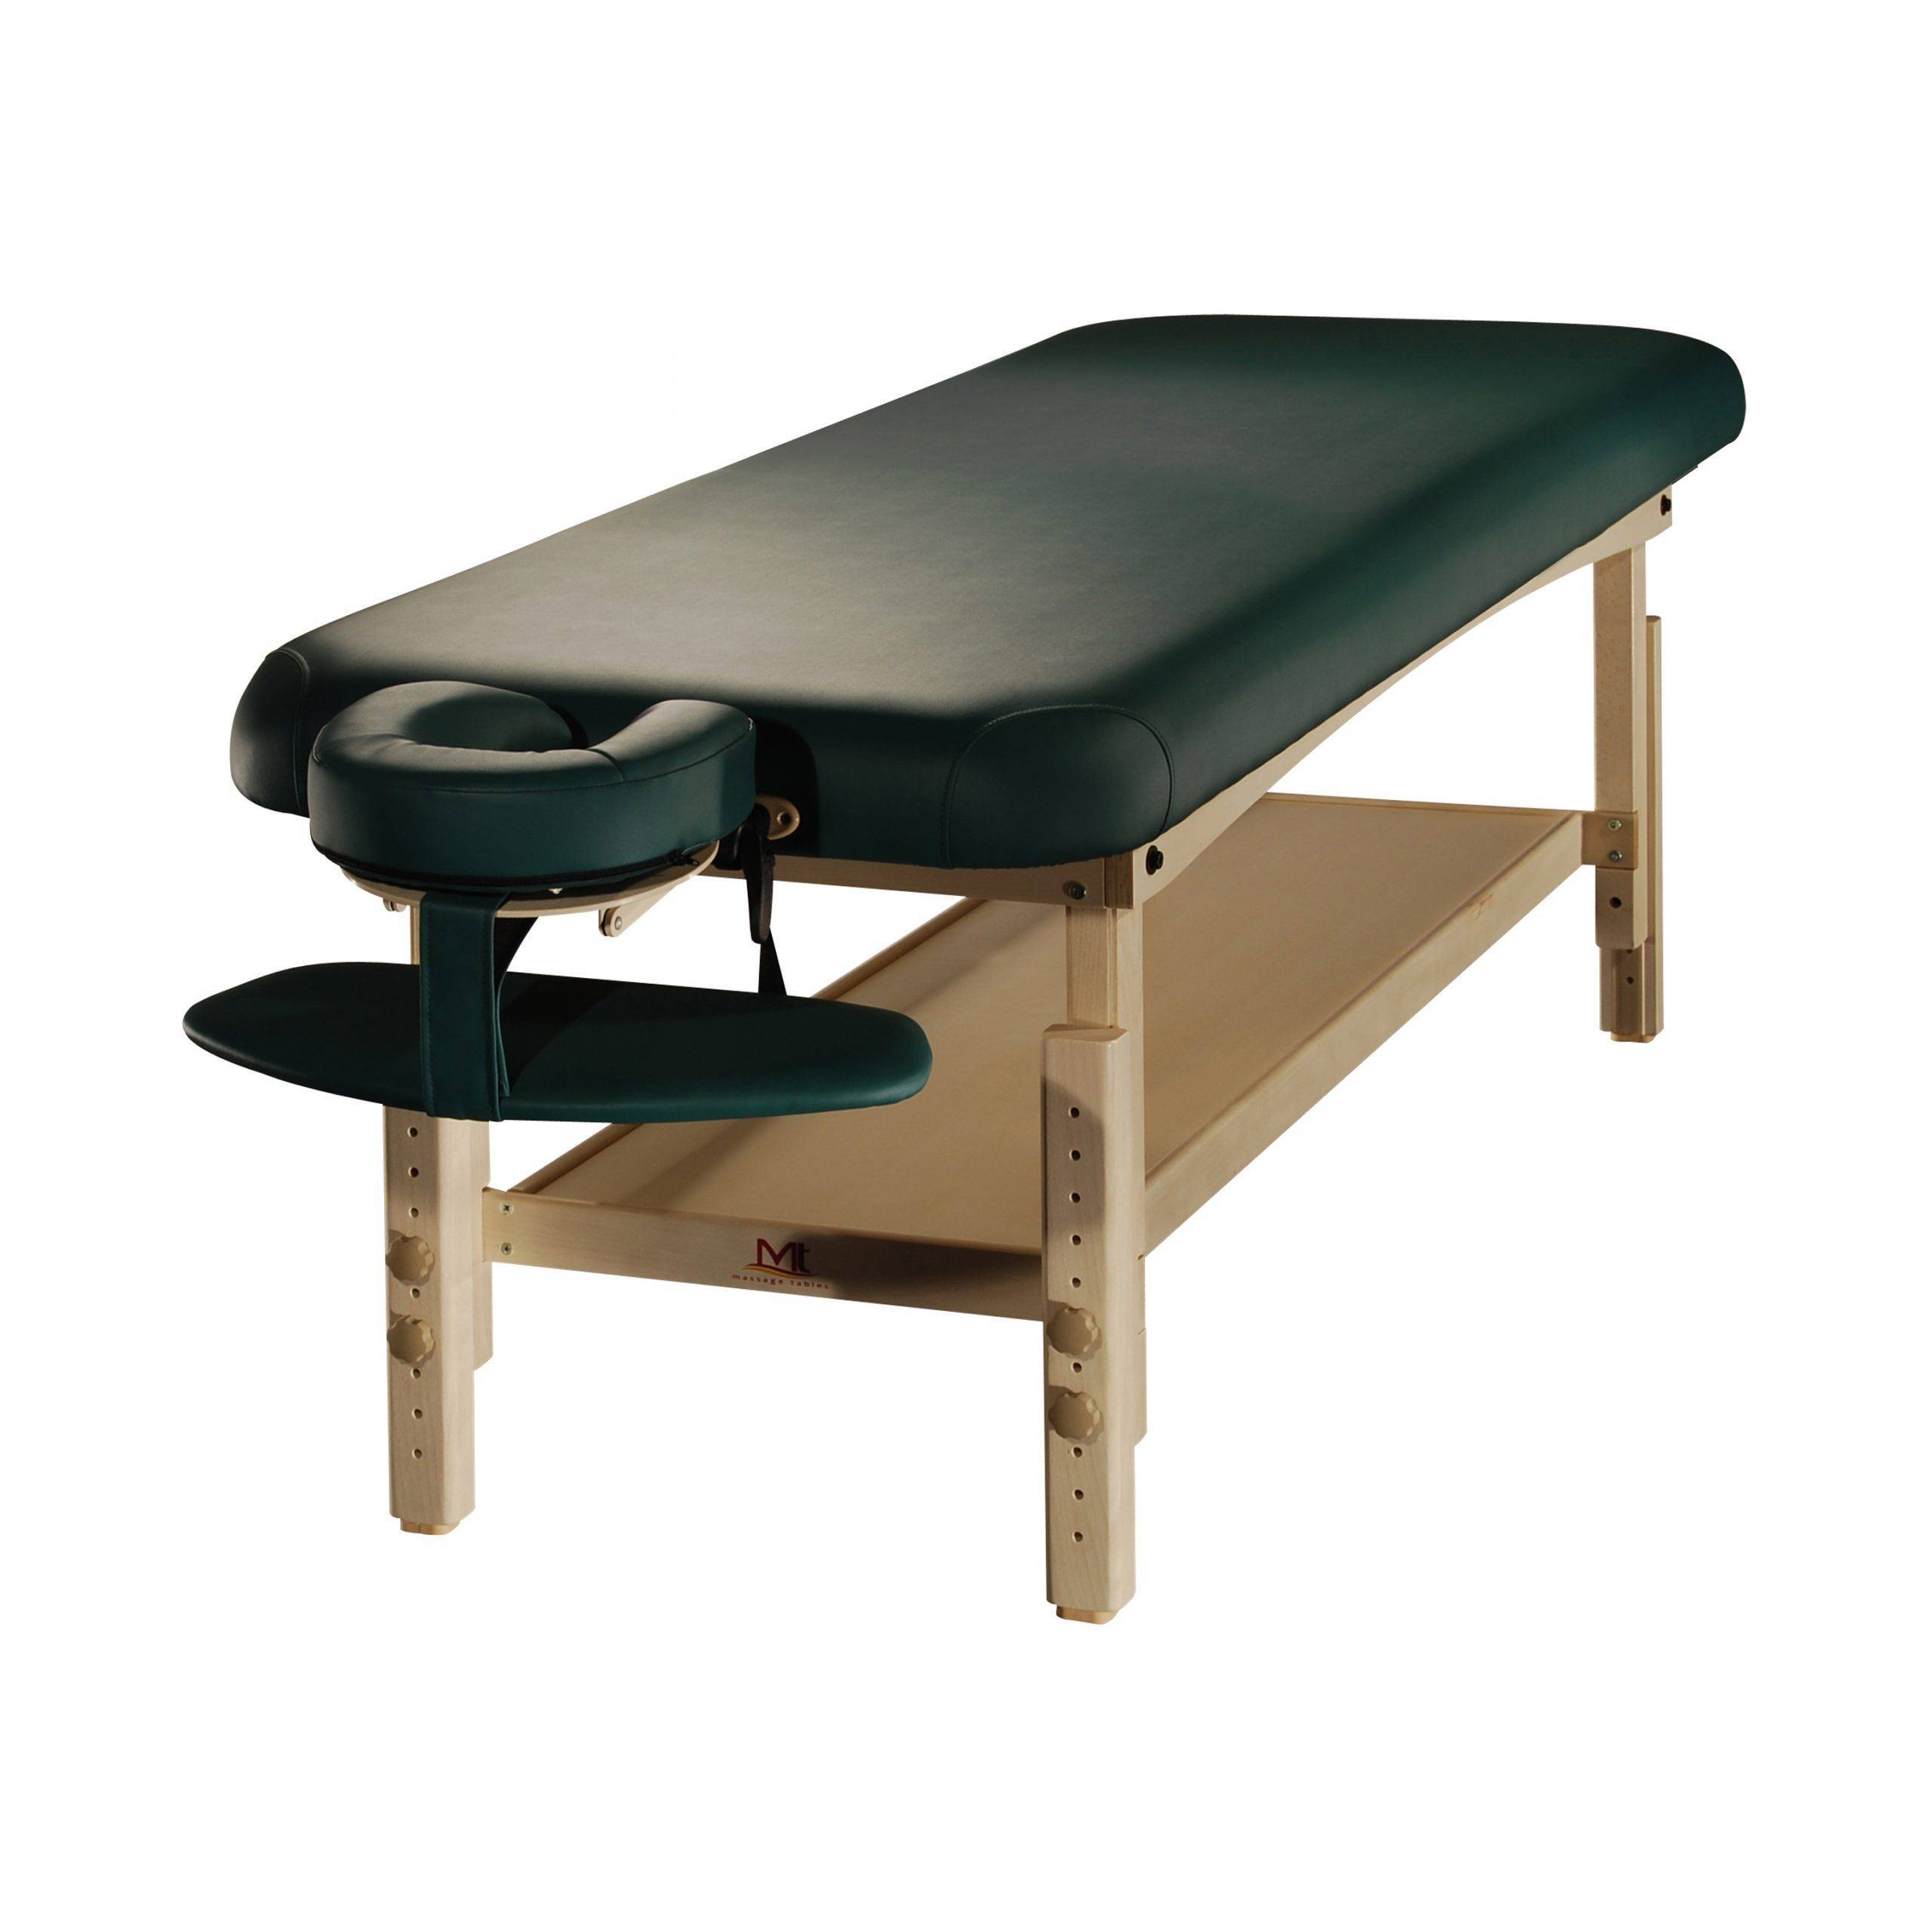 MediSports Classic Stationary Massage Table - BLACK - physio supplies canada